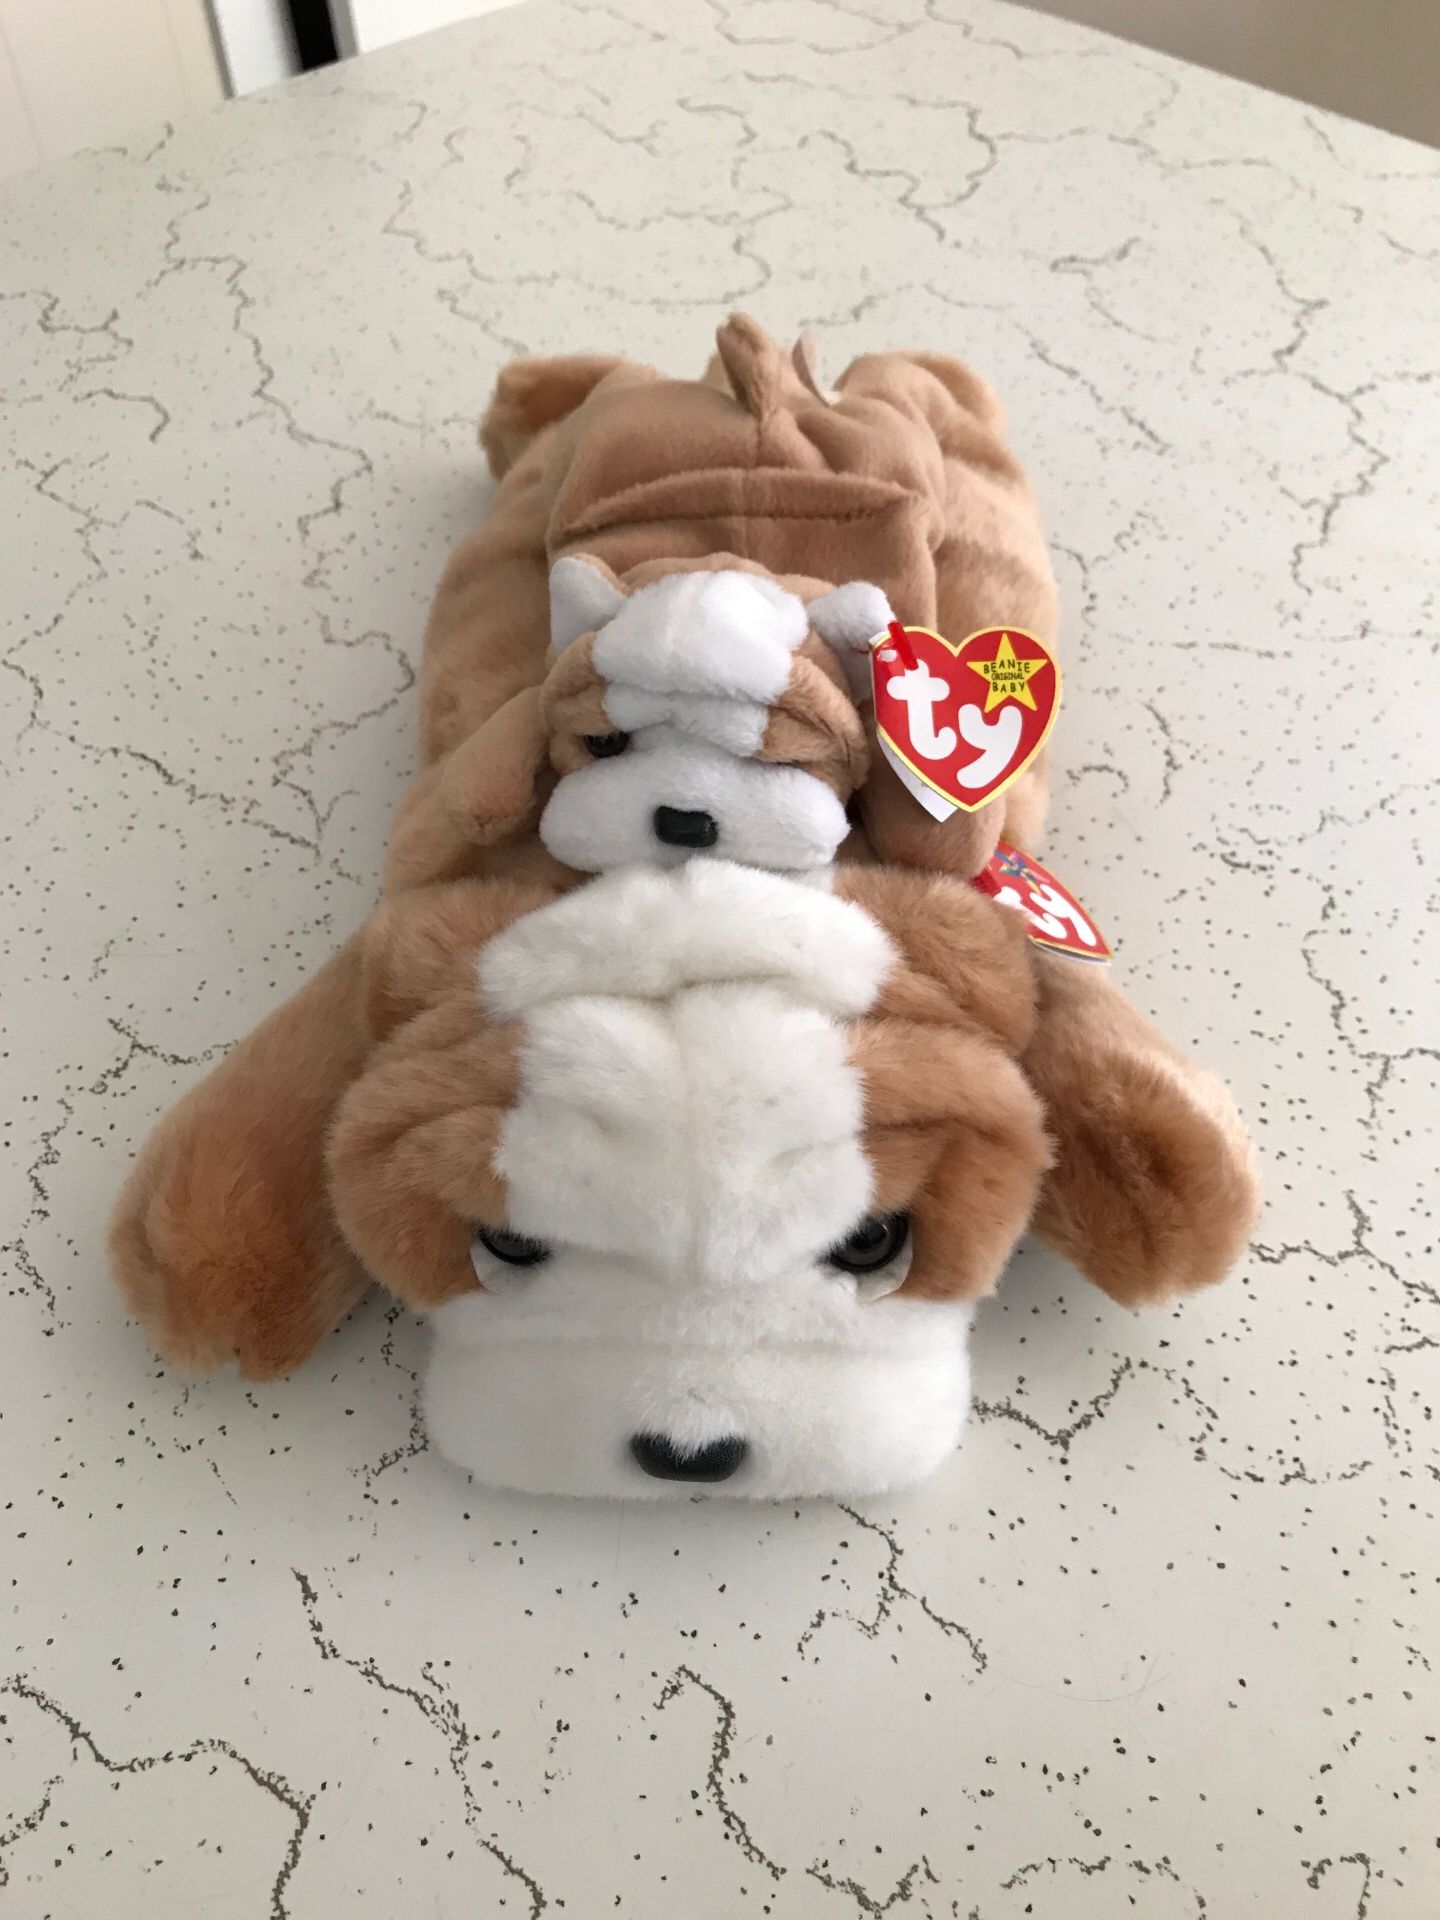 Rare Ty buddy and beanie baby set of Wrinkles the bulldog